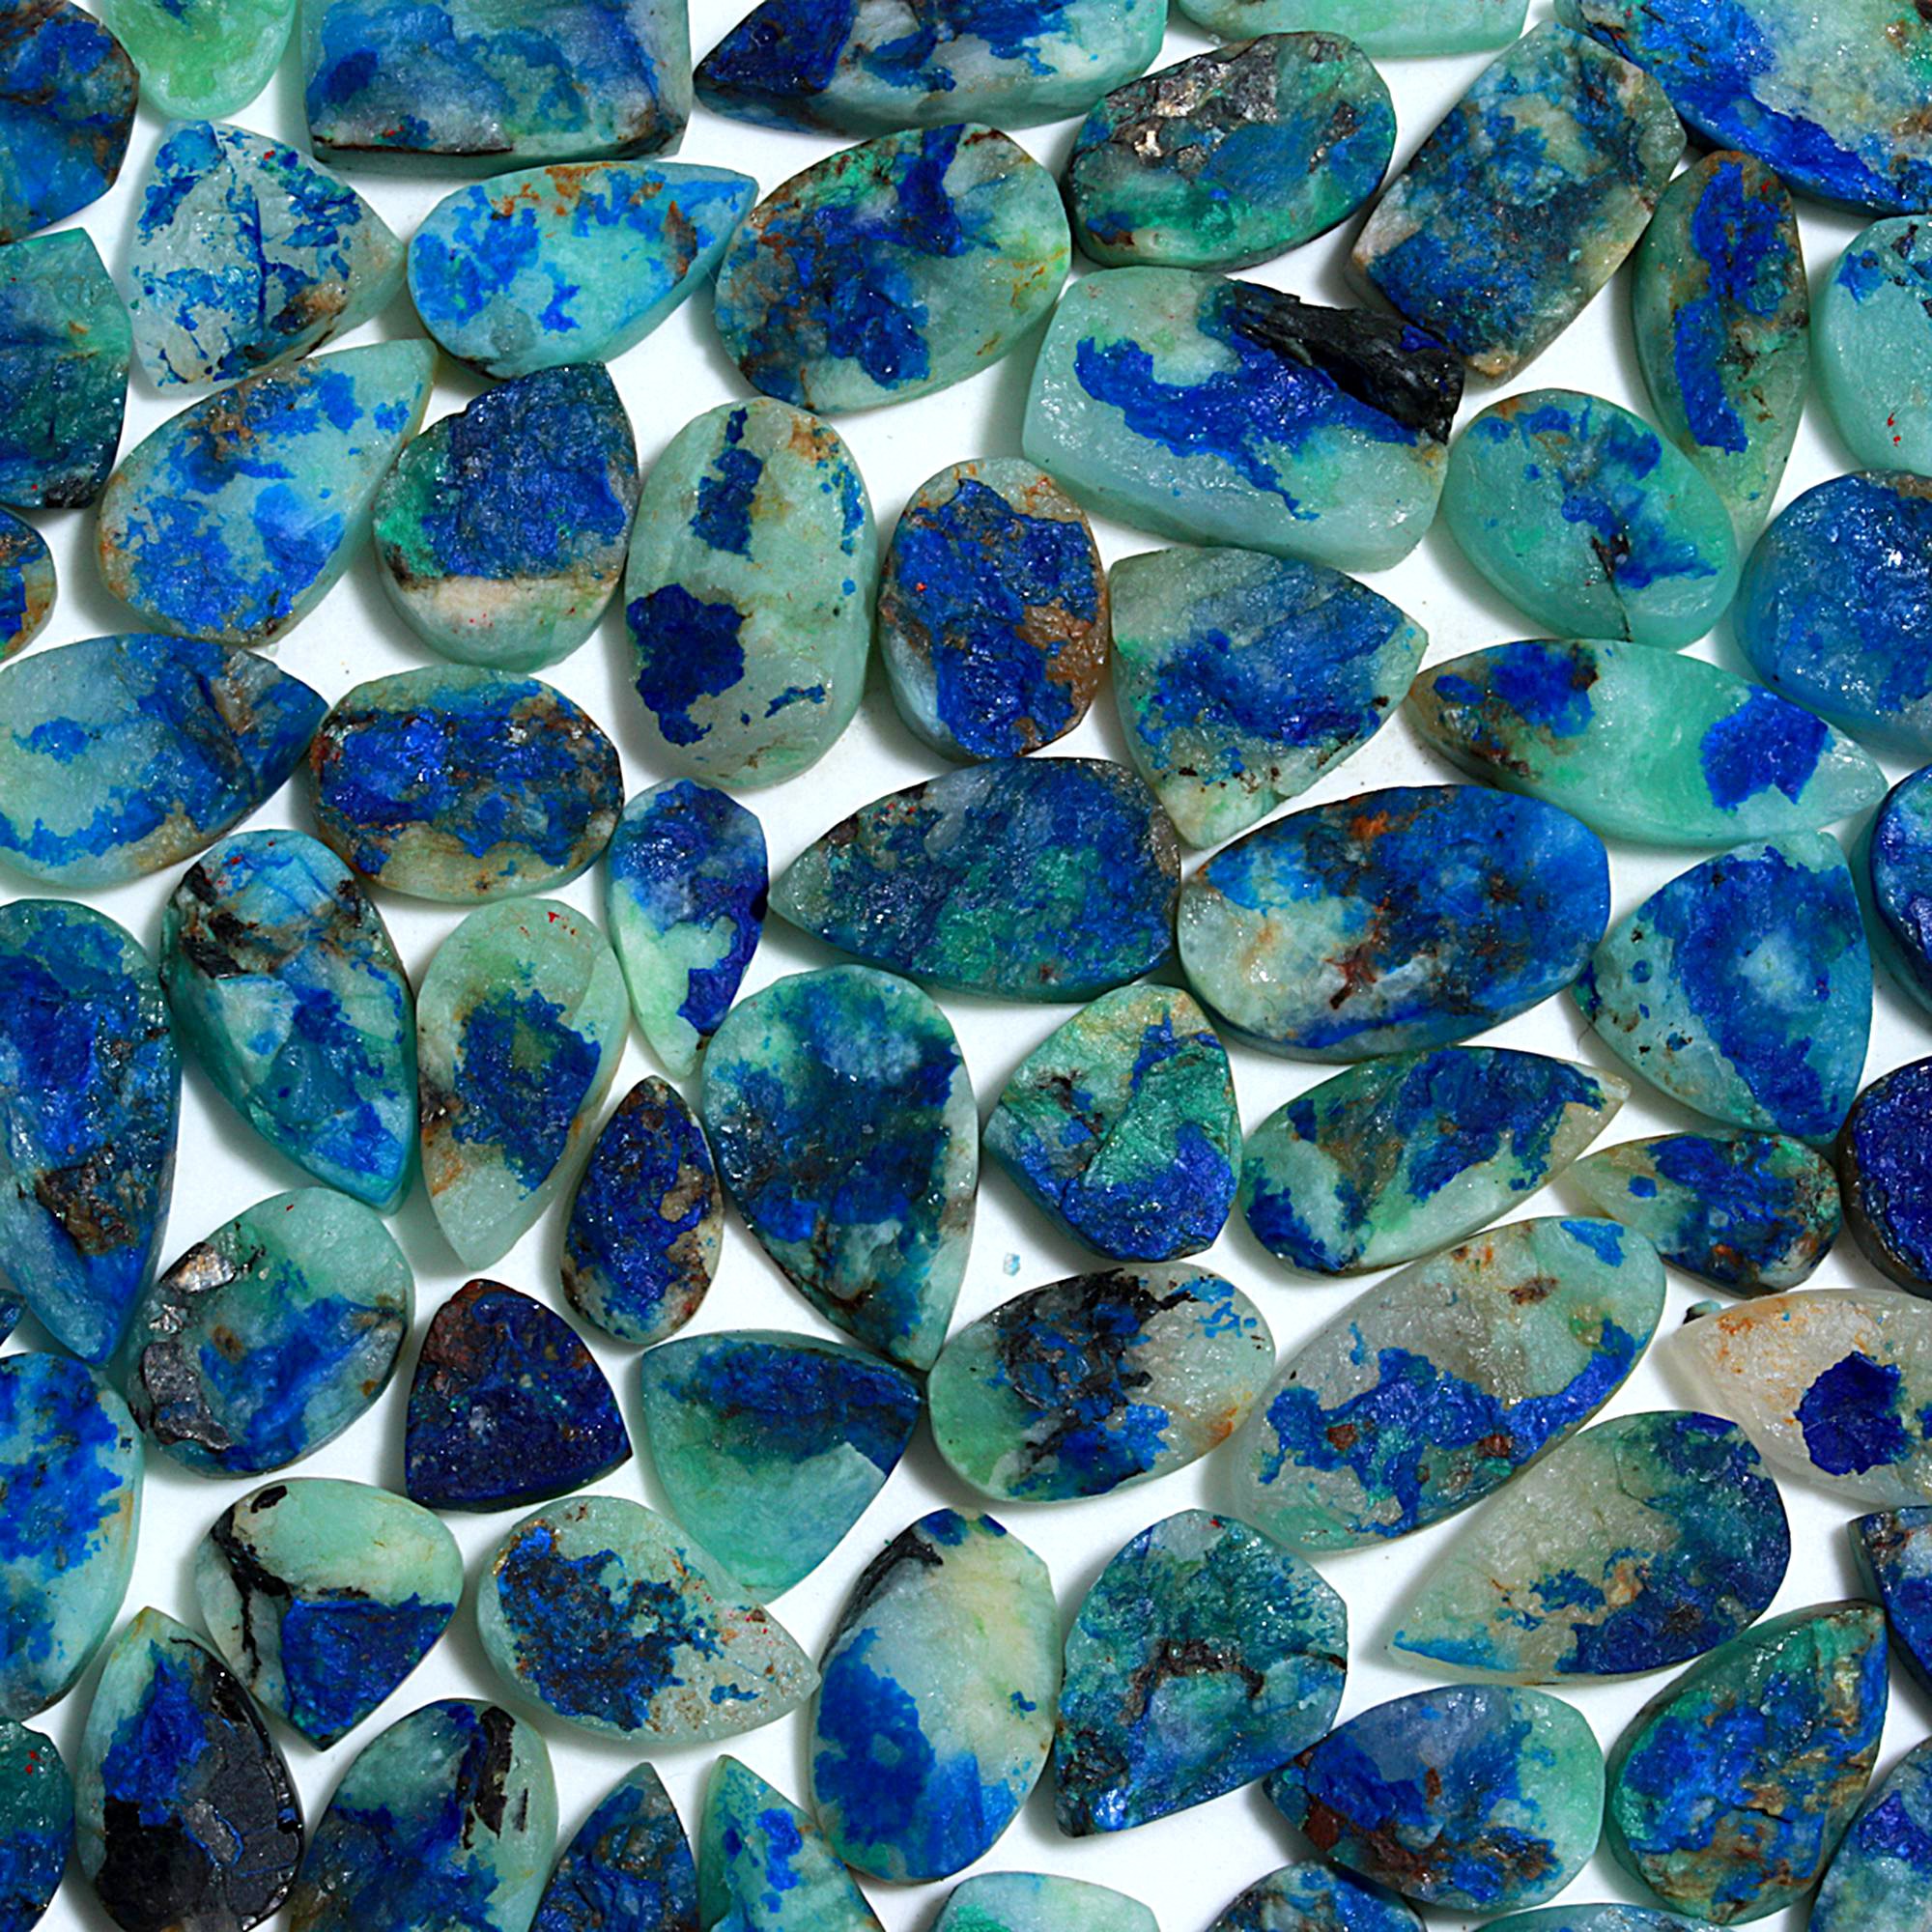 94 Pcs 552.Cts Natural Azurite Druzy Unpolished Loose Cabochon Gemstone For Jewelry Wholesale Lot Size 23x11 9x10mm